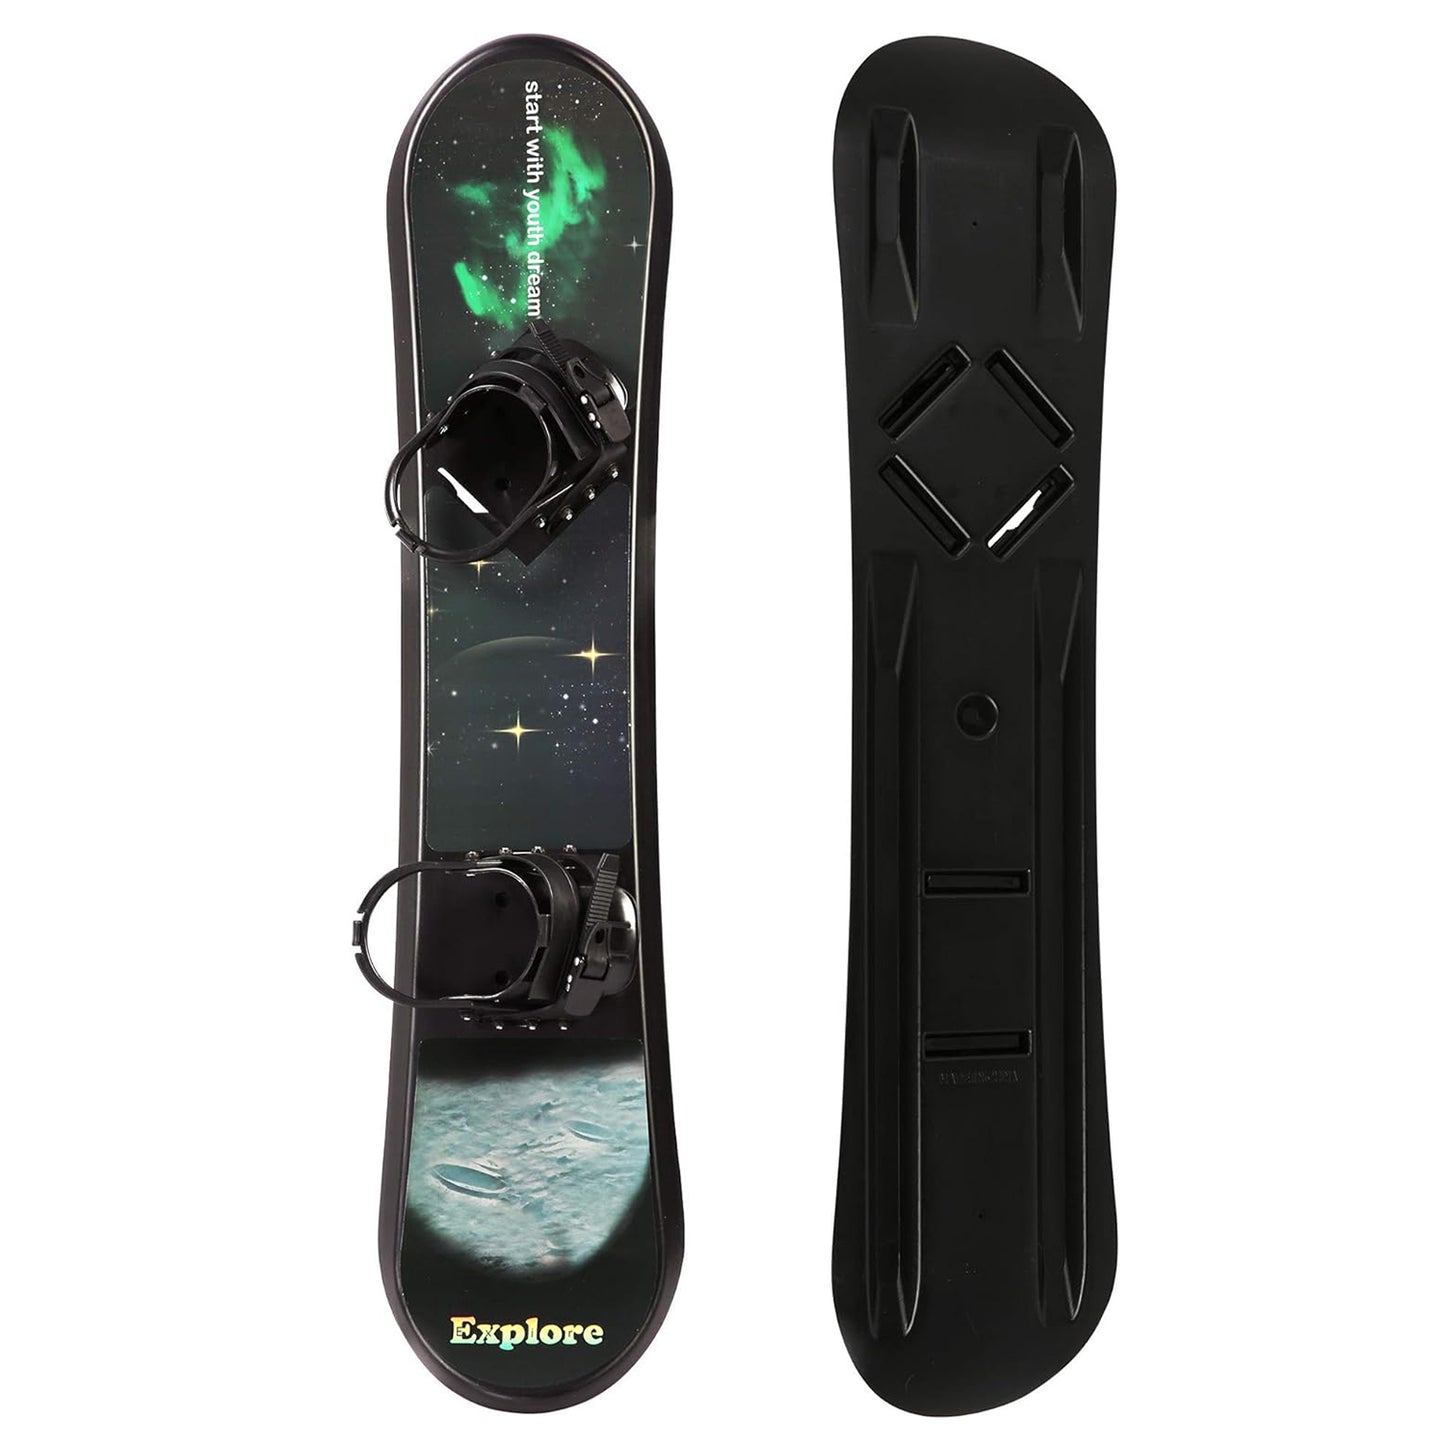 Snowboard for Kids Beginners Age 5-15 with Adjustable Step-in Bindings Winter Sport Ski Snow Board